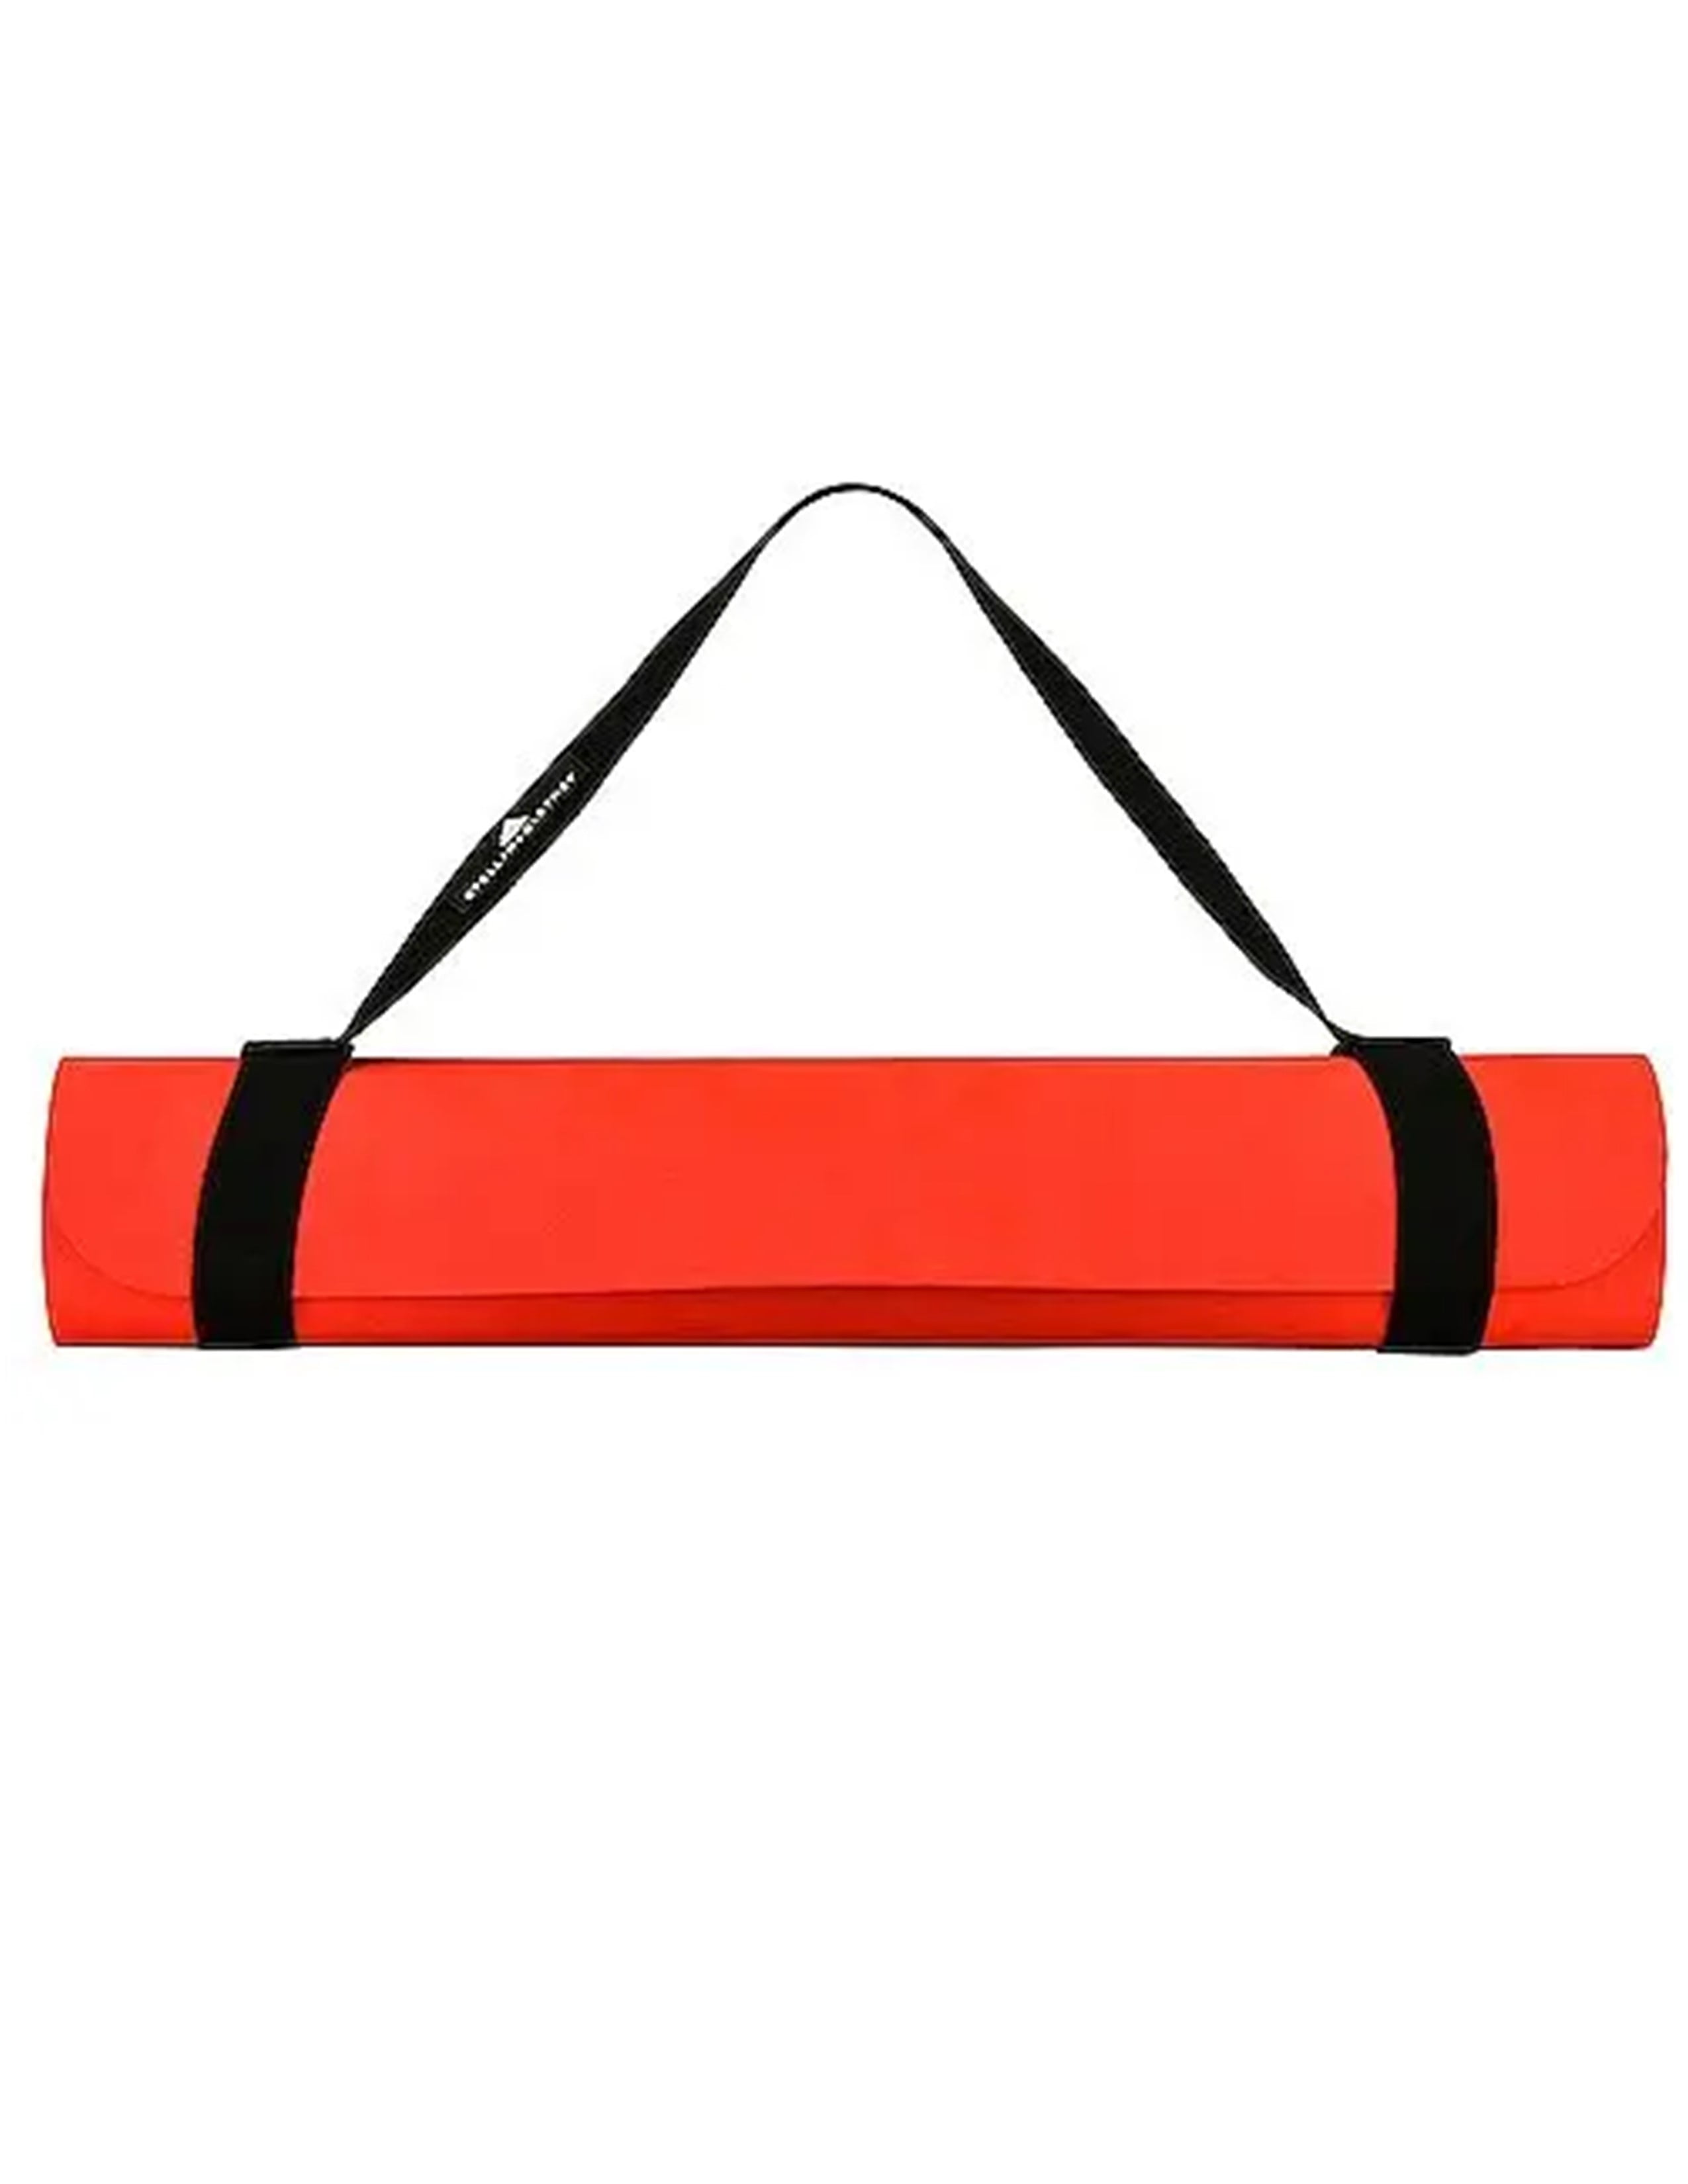 Adidas By Stella McCartney Women's Sport Large Yoga Mat in Red